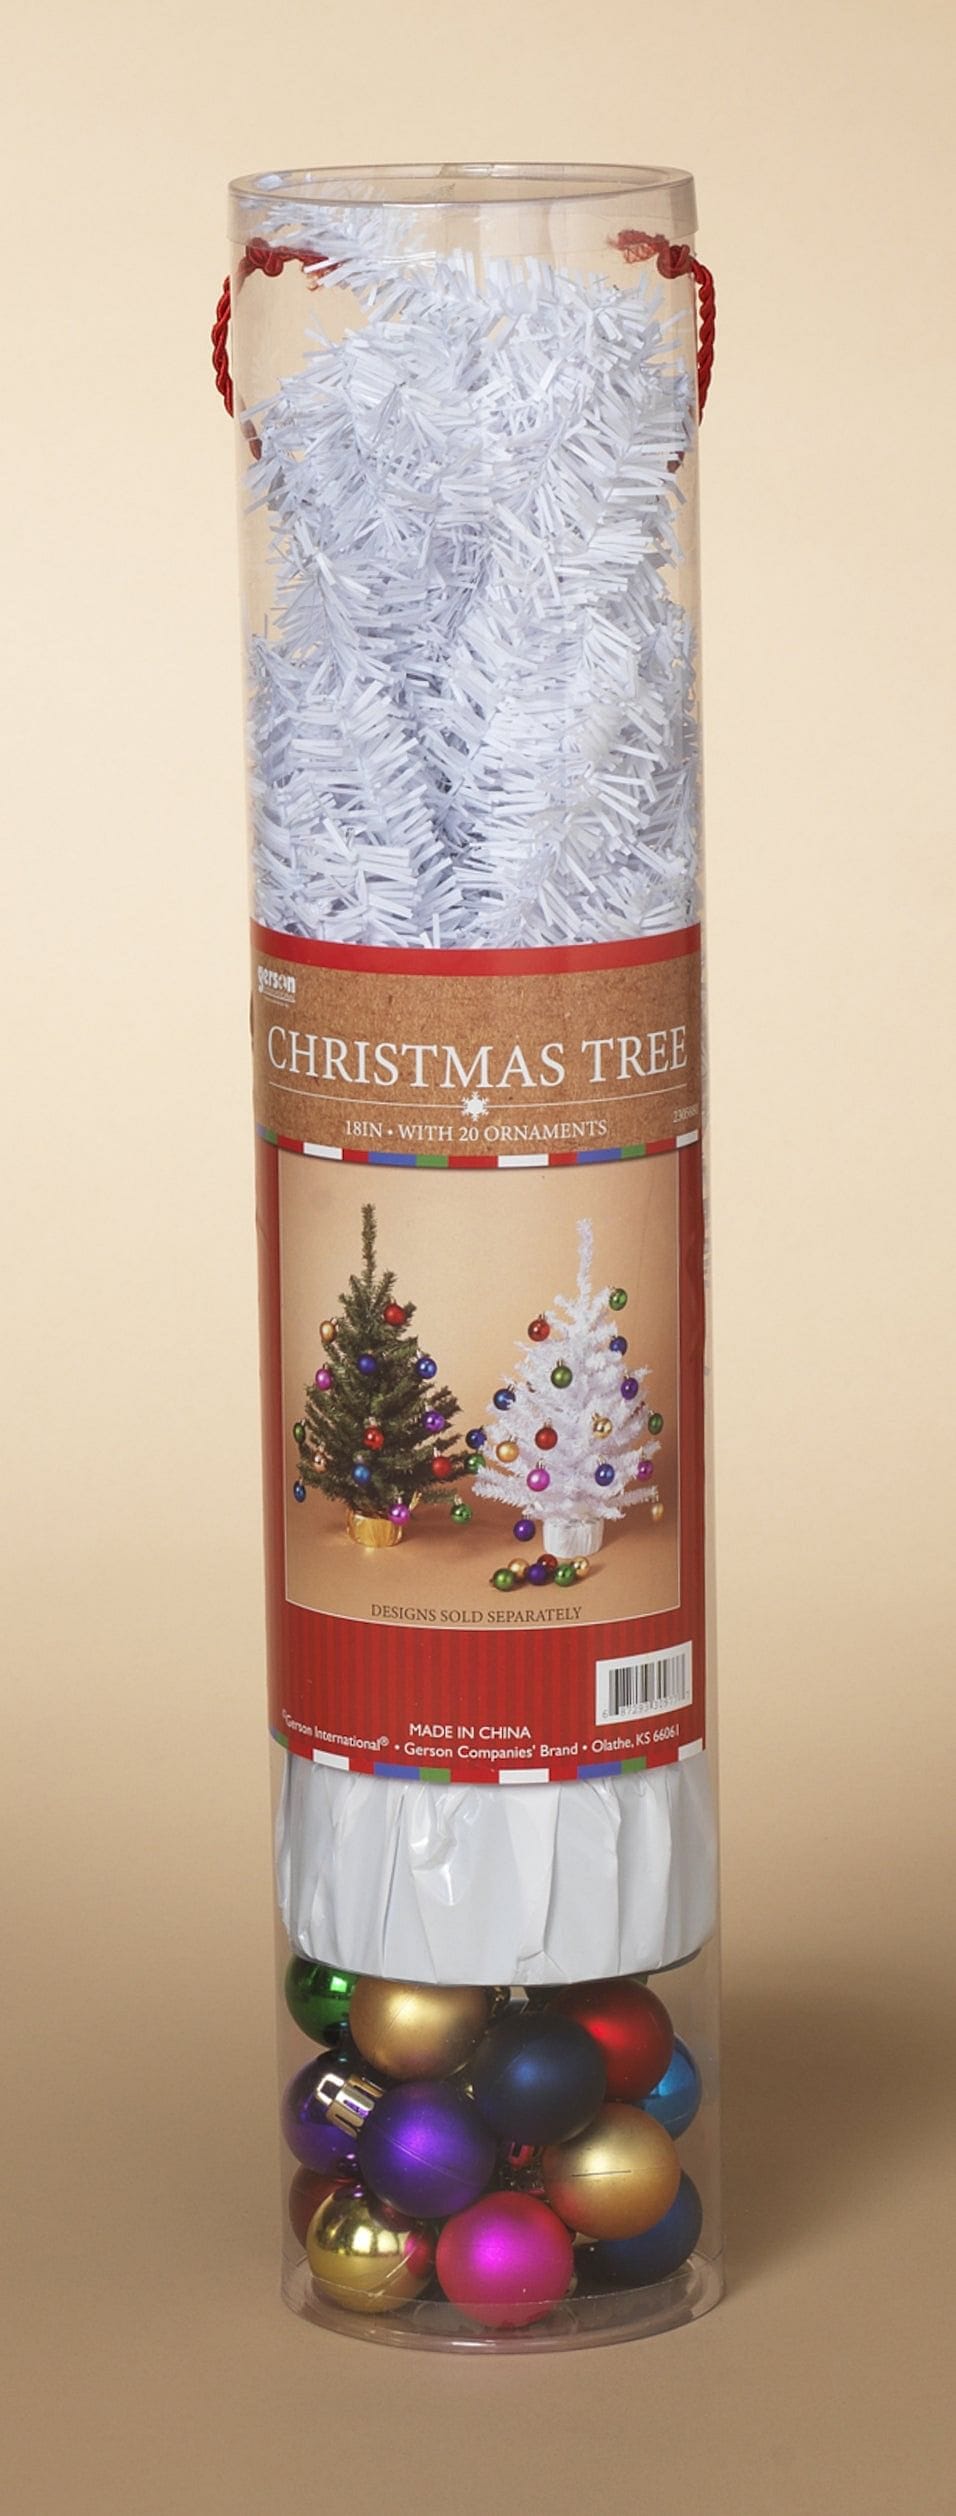 18 Inch Christmas Tree with 20 Ornaments - White - Shelburne Country Store